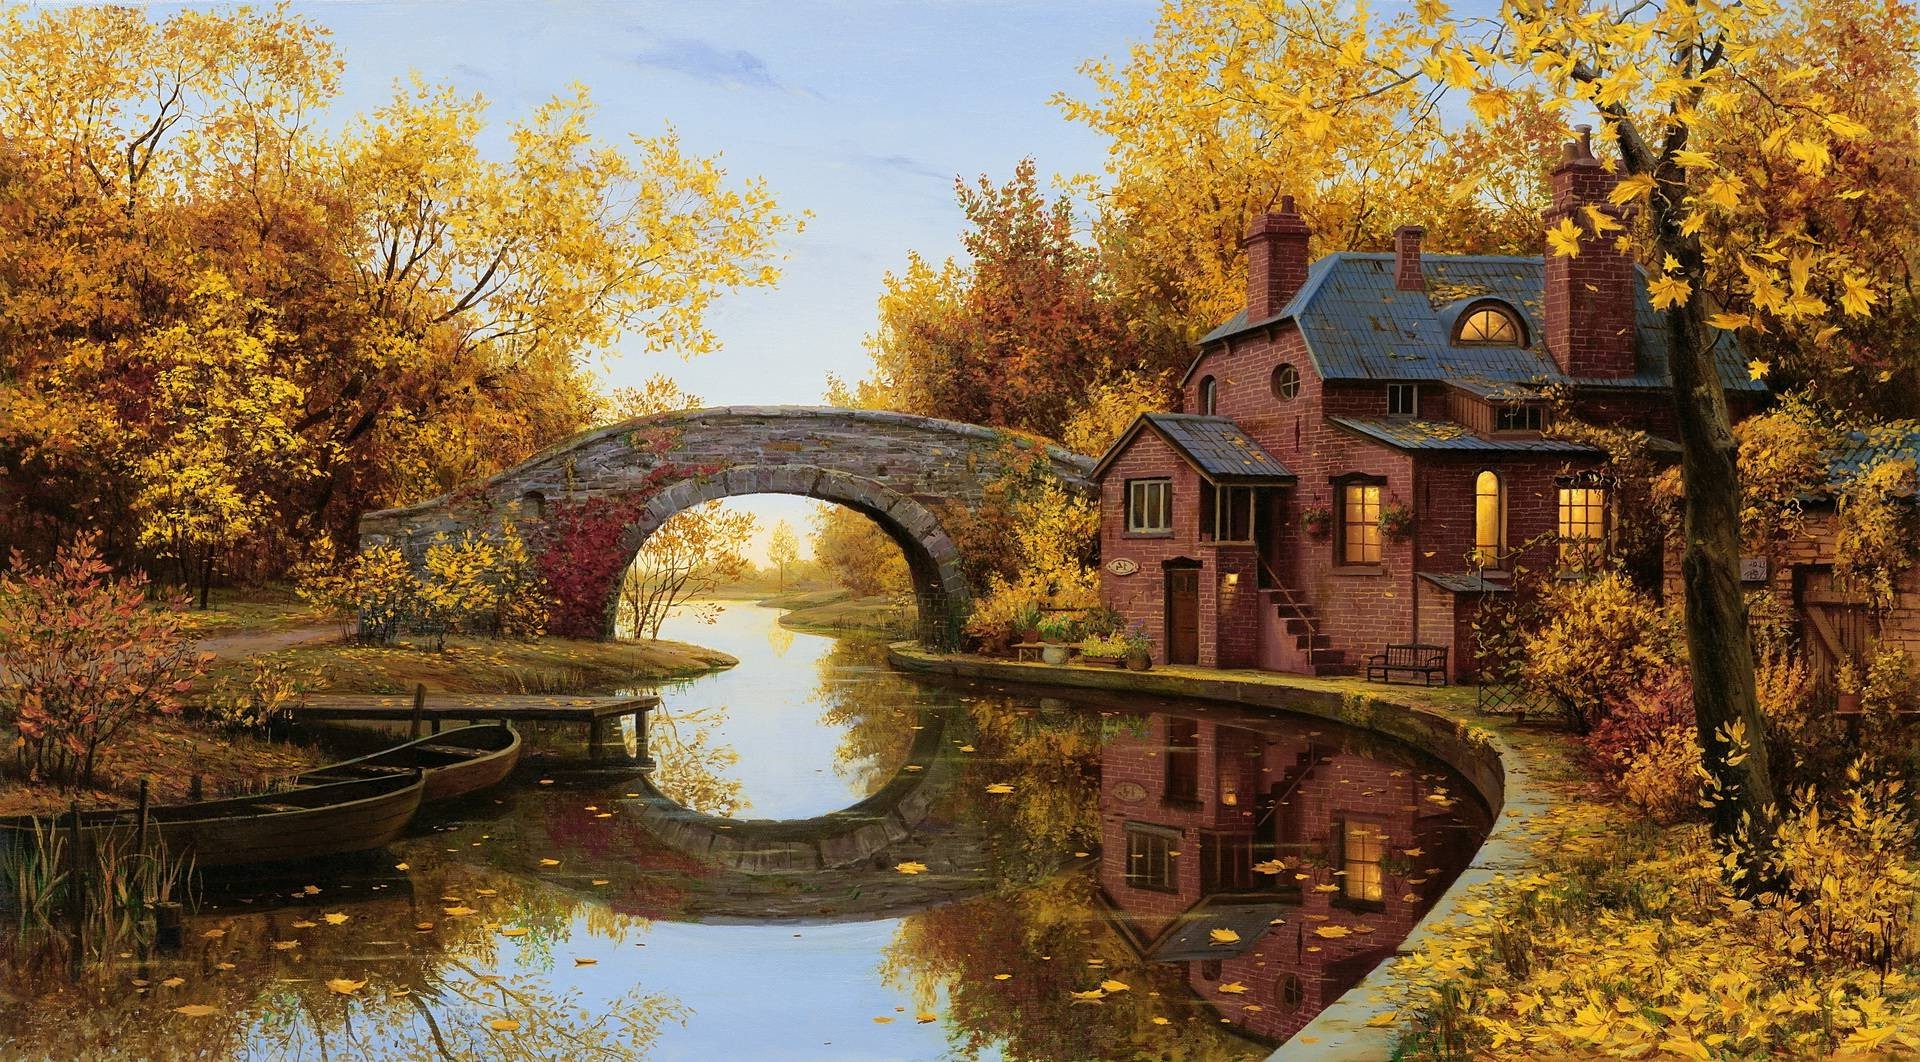 reflection, Bridge, Arch, River, House, Trees, Boat, Fall Wallpaper